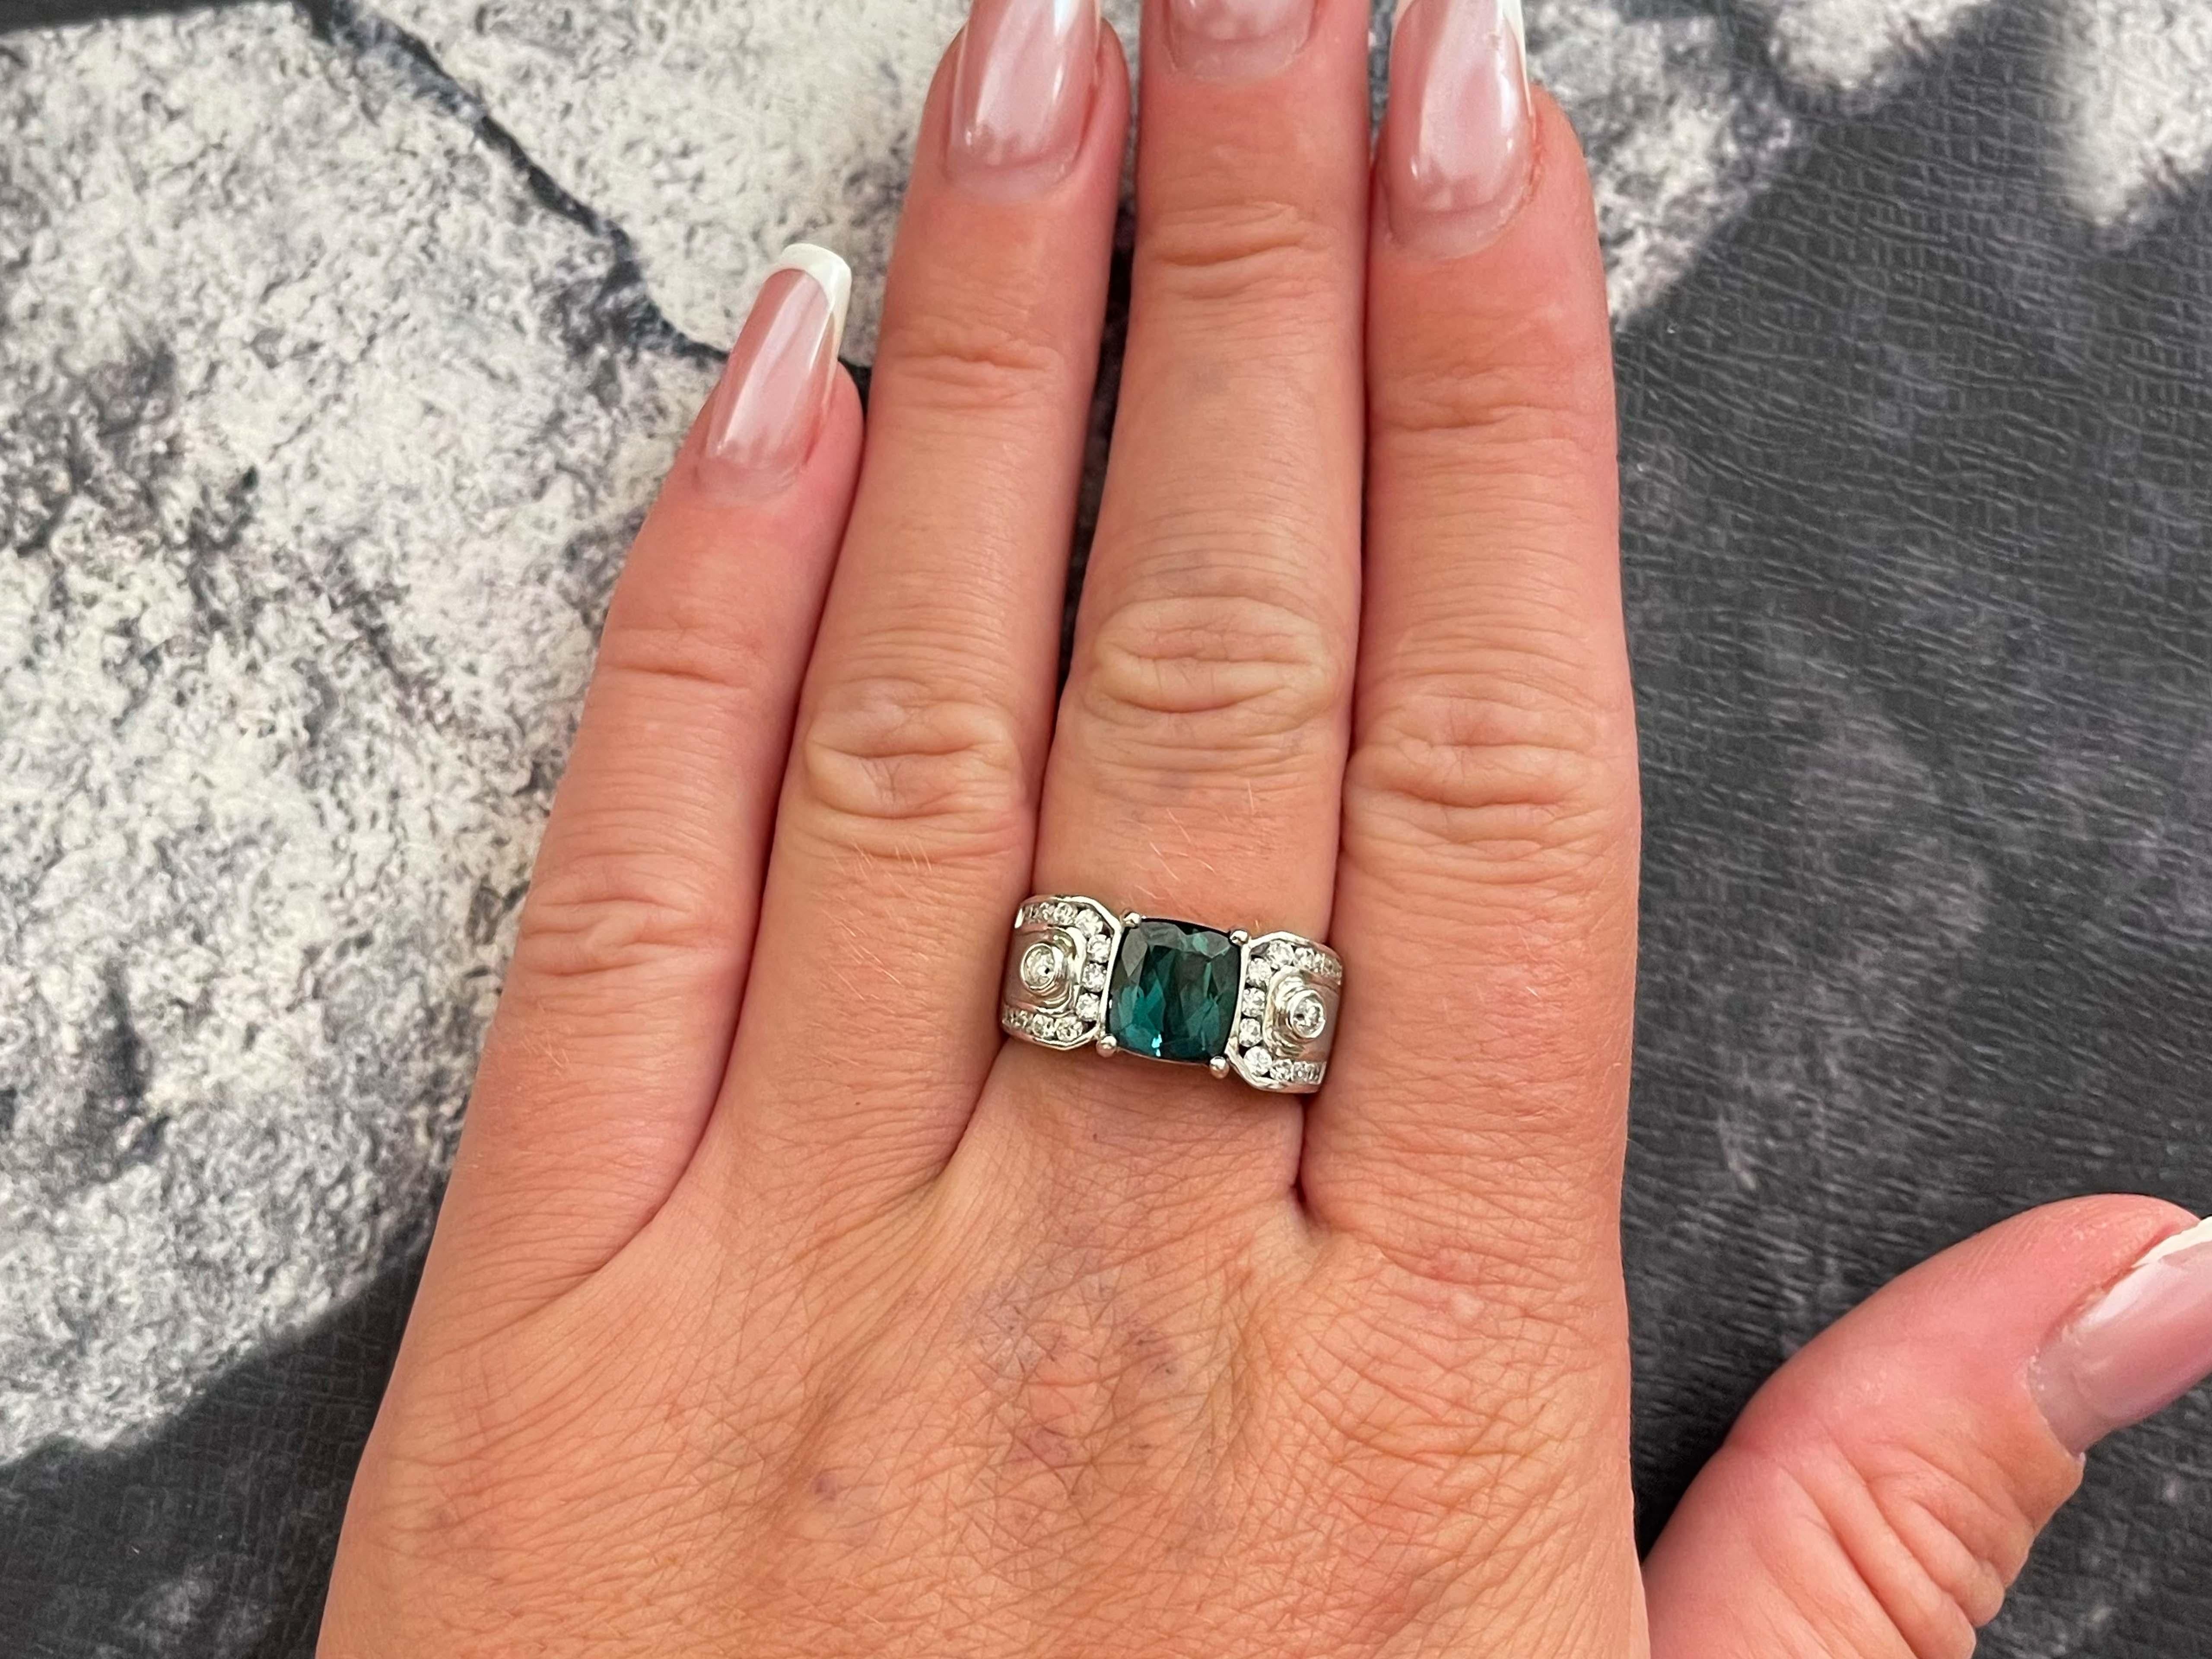 Ring Specifications:

Metal: 14K White Gold

Weight: 8.72 grams

Ring Size: 7 (Free Resizing Available)

Center Gemstone Specifications:

Gemstone GIA Report #: 6237037943

Species: Tourmaline 